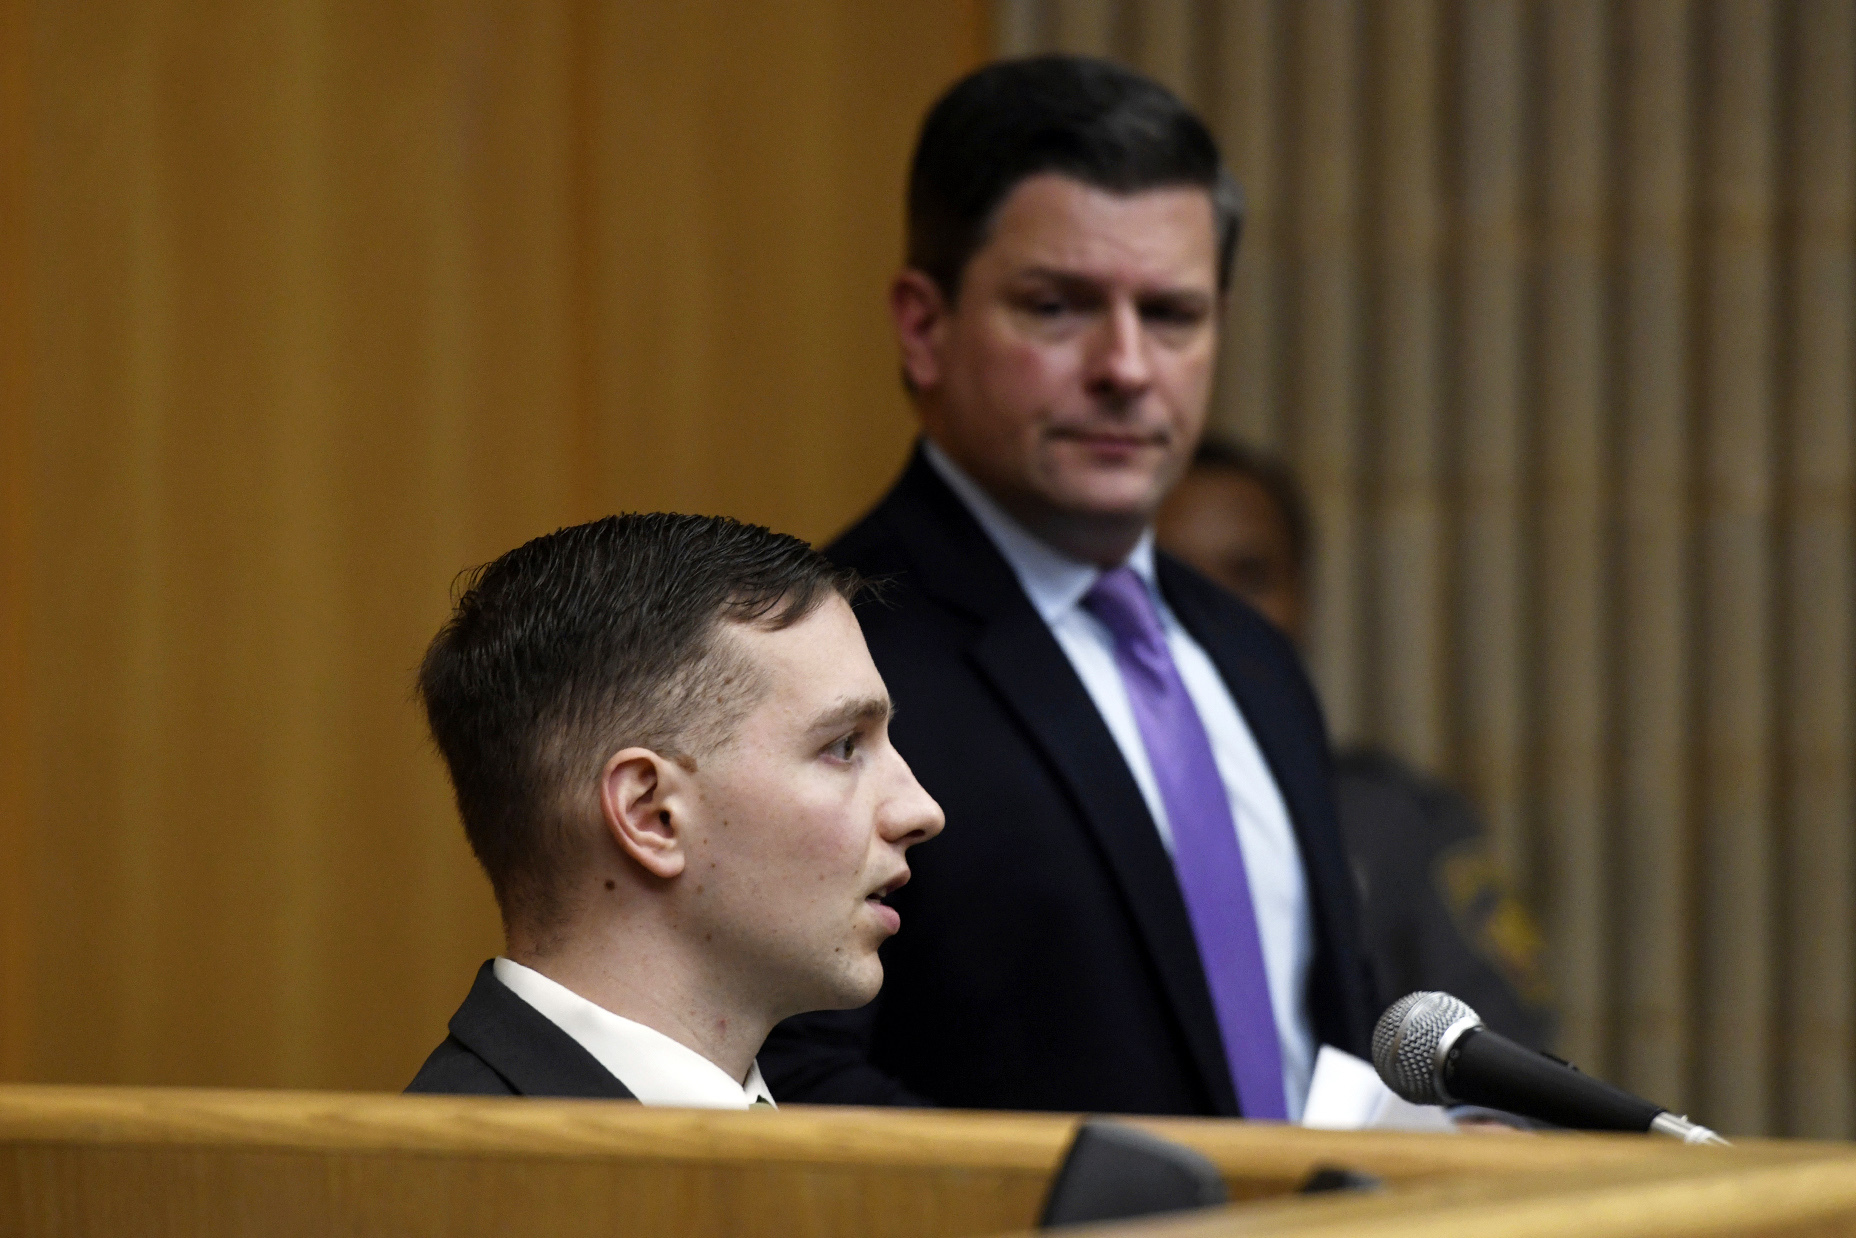 Connecticut State Trooper Brian North, foreground,a nswers questions from his defense attorney Frank Riccio as he testifies during his trial in Connecticut Superior Court, Friday, March 8, 2024, in Milford, Conn. North is charged with first-degree manslaughter for shooting 19-year-old Mubarak Soulemane in January 2020 in West Haven after a chase from Norwalk on Interstate 95. (Ned Gerard/Hearst Connecticut Media via AP, Pool)